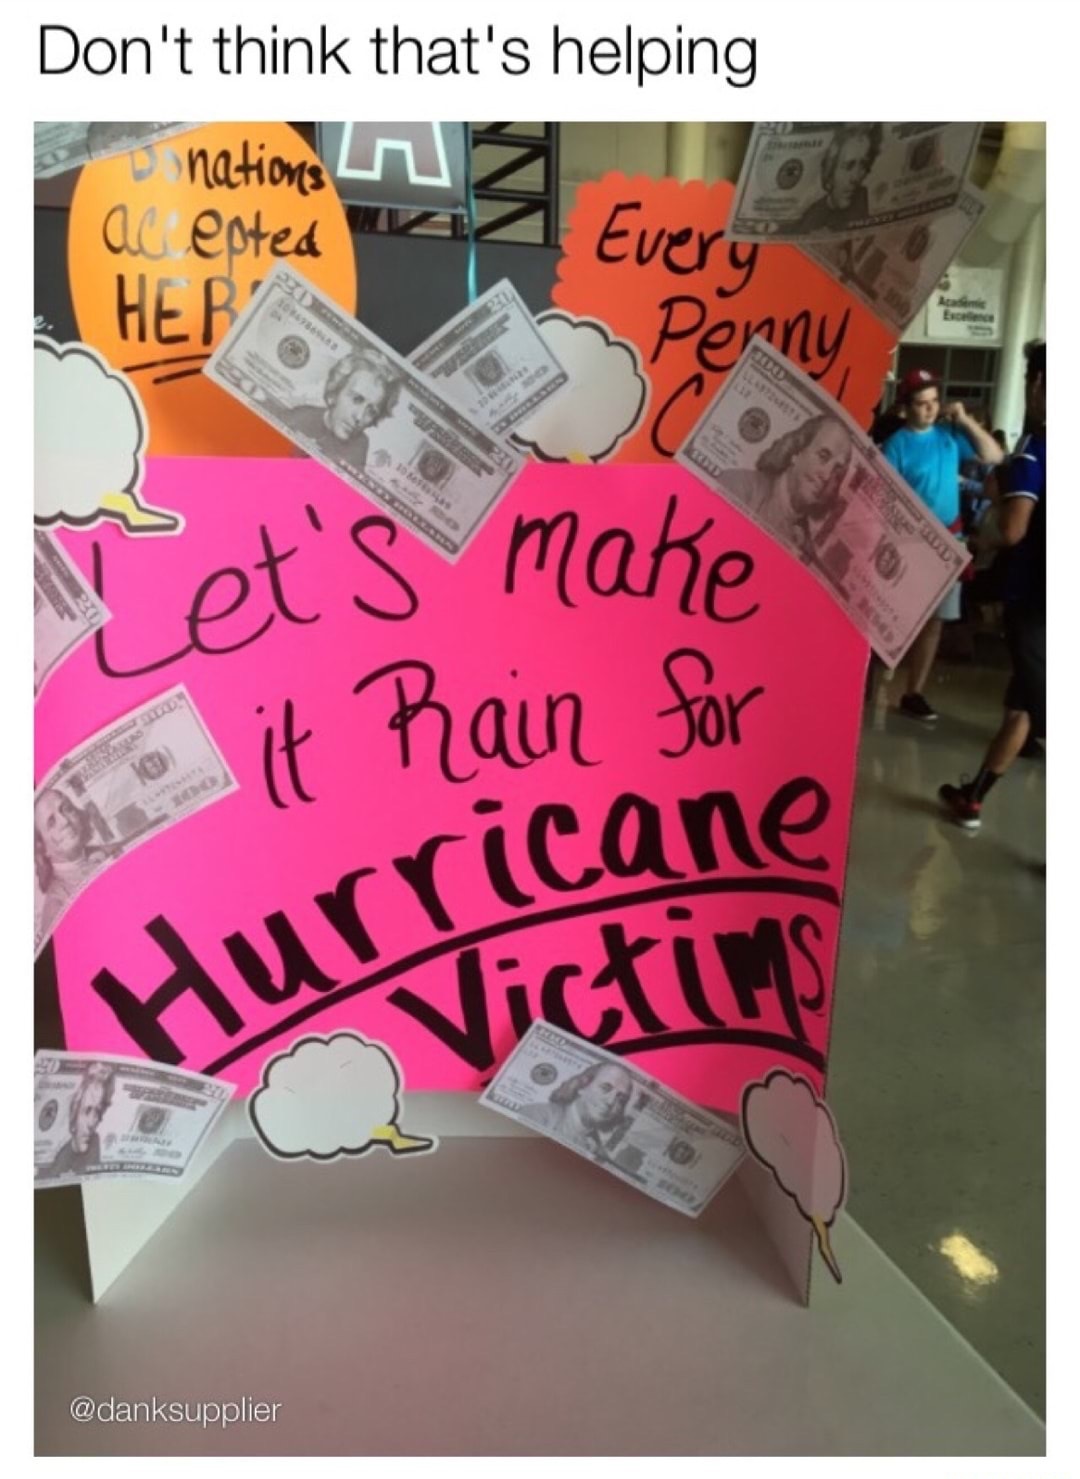 dank meme poster - Don't think that's helping onations ac epted Every Her let's make it rain for rricane Hu Victims